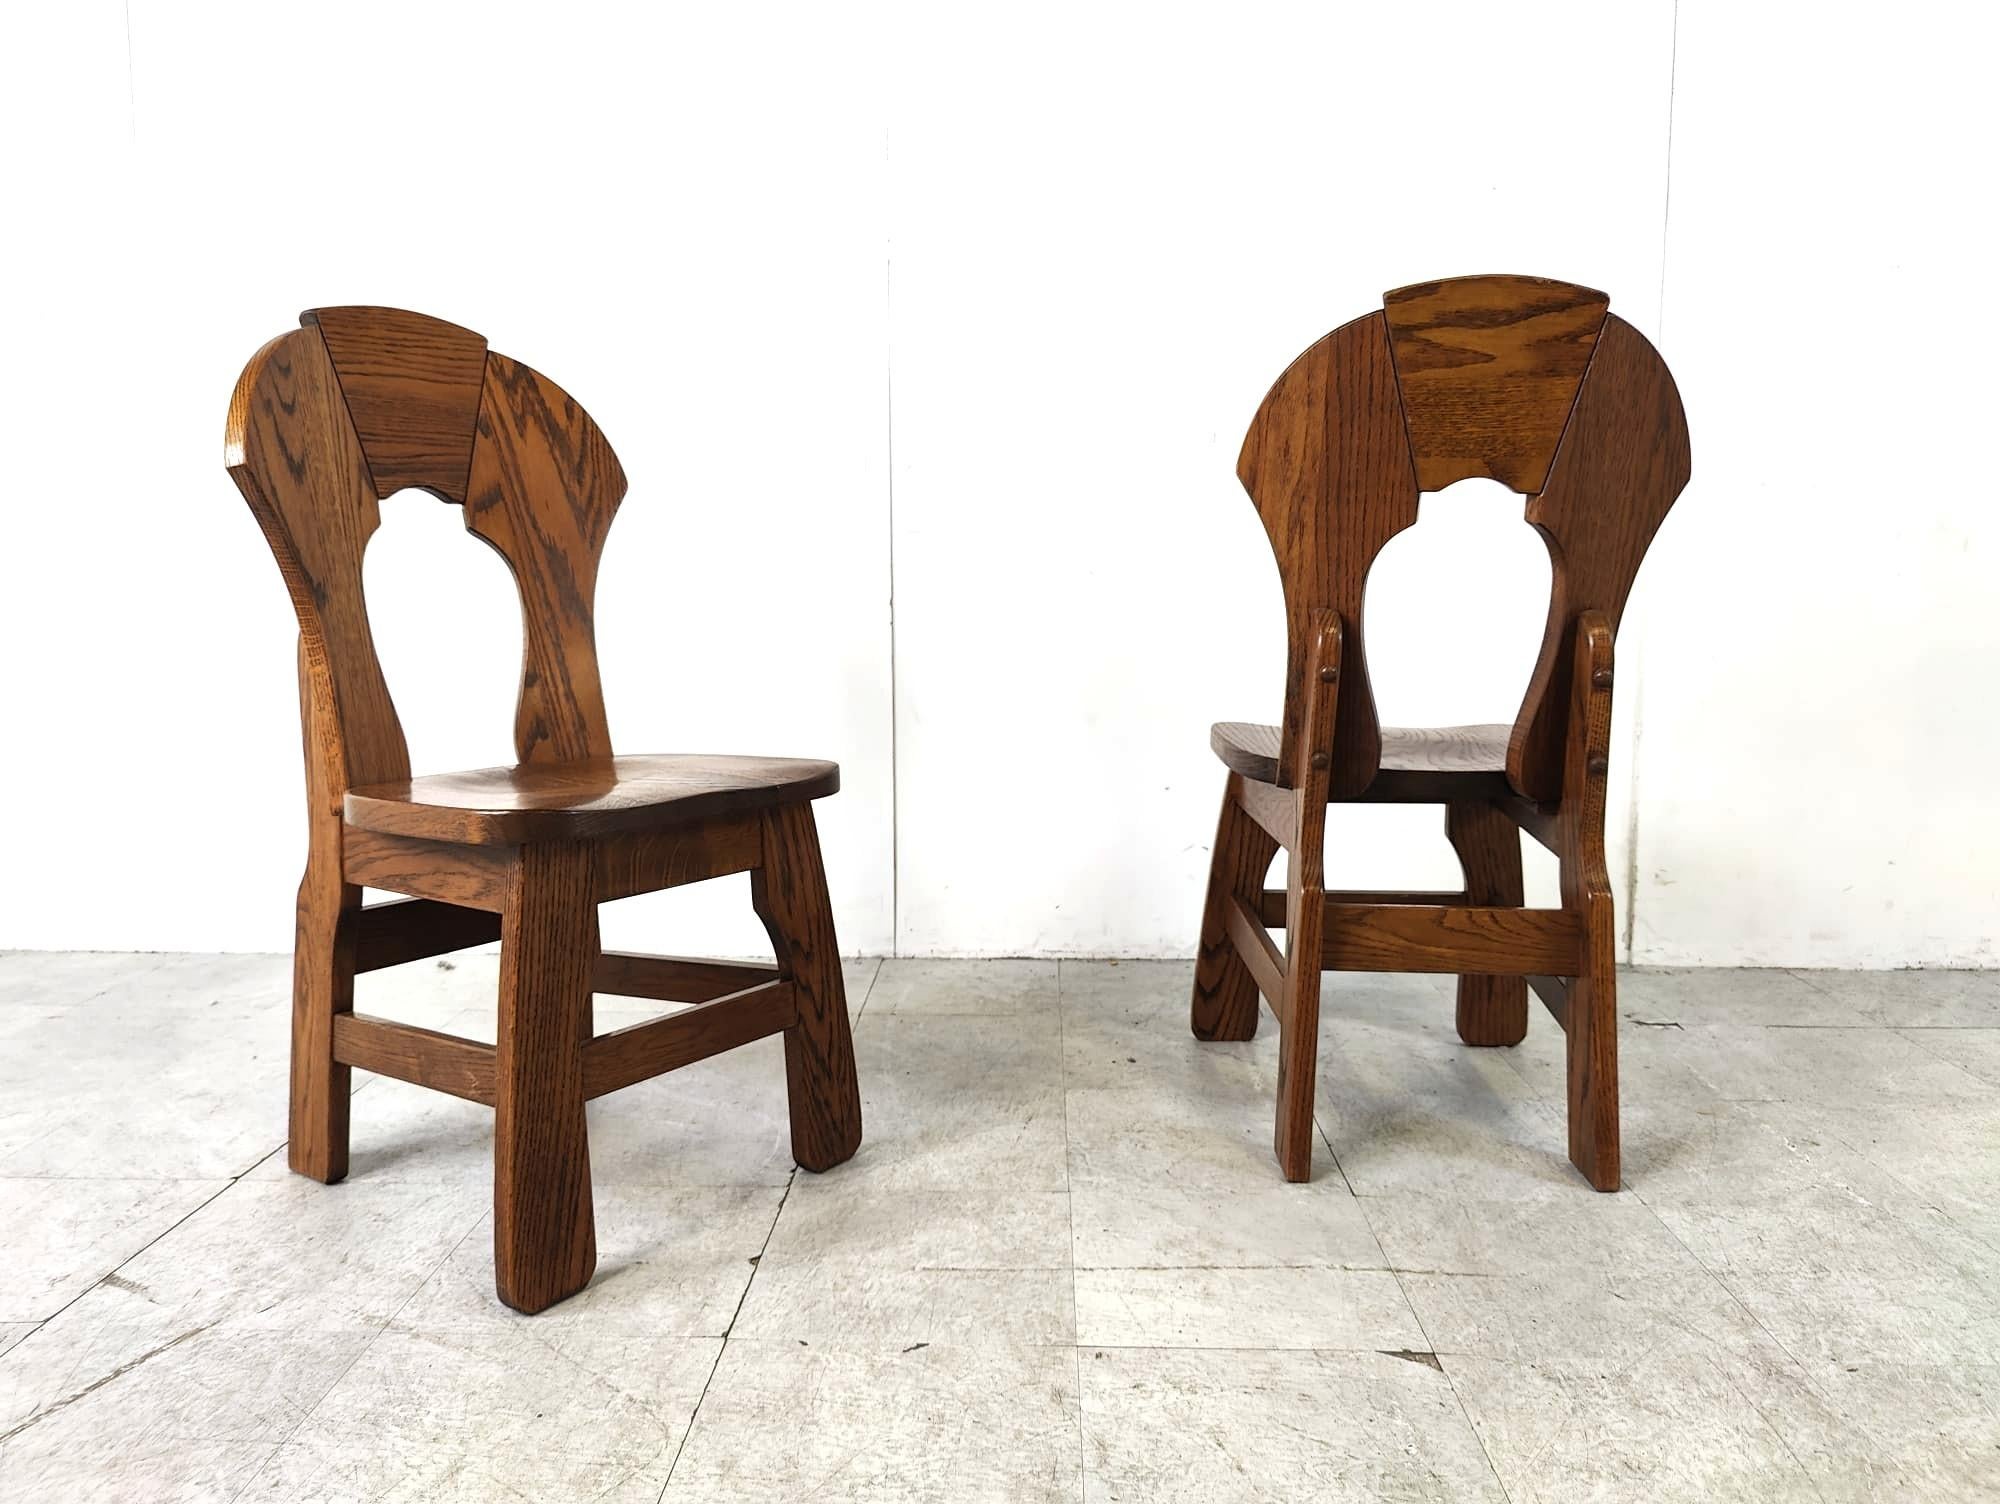 Mid century solid wood  brutalist dining chairs, set of 6 

Good original condition.

1960s - Germany

Dimensions:
Height: 97cm
Width: 45cm
Depth: 49cm
Seat height: 46cm

Ref.: 203032

*Price is for the set